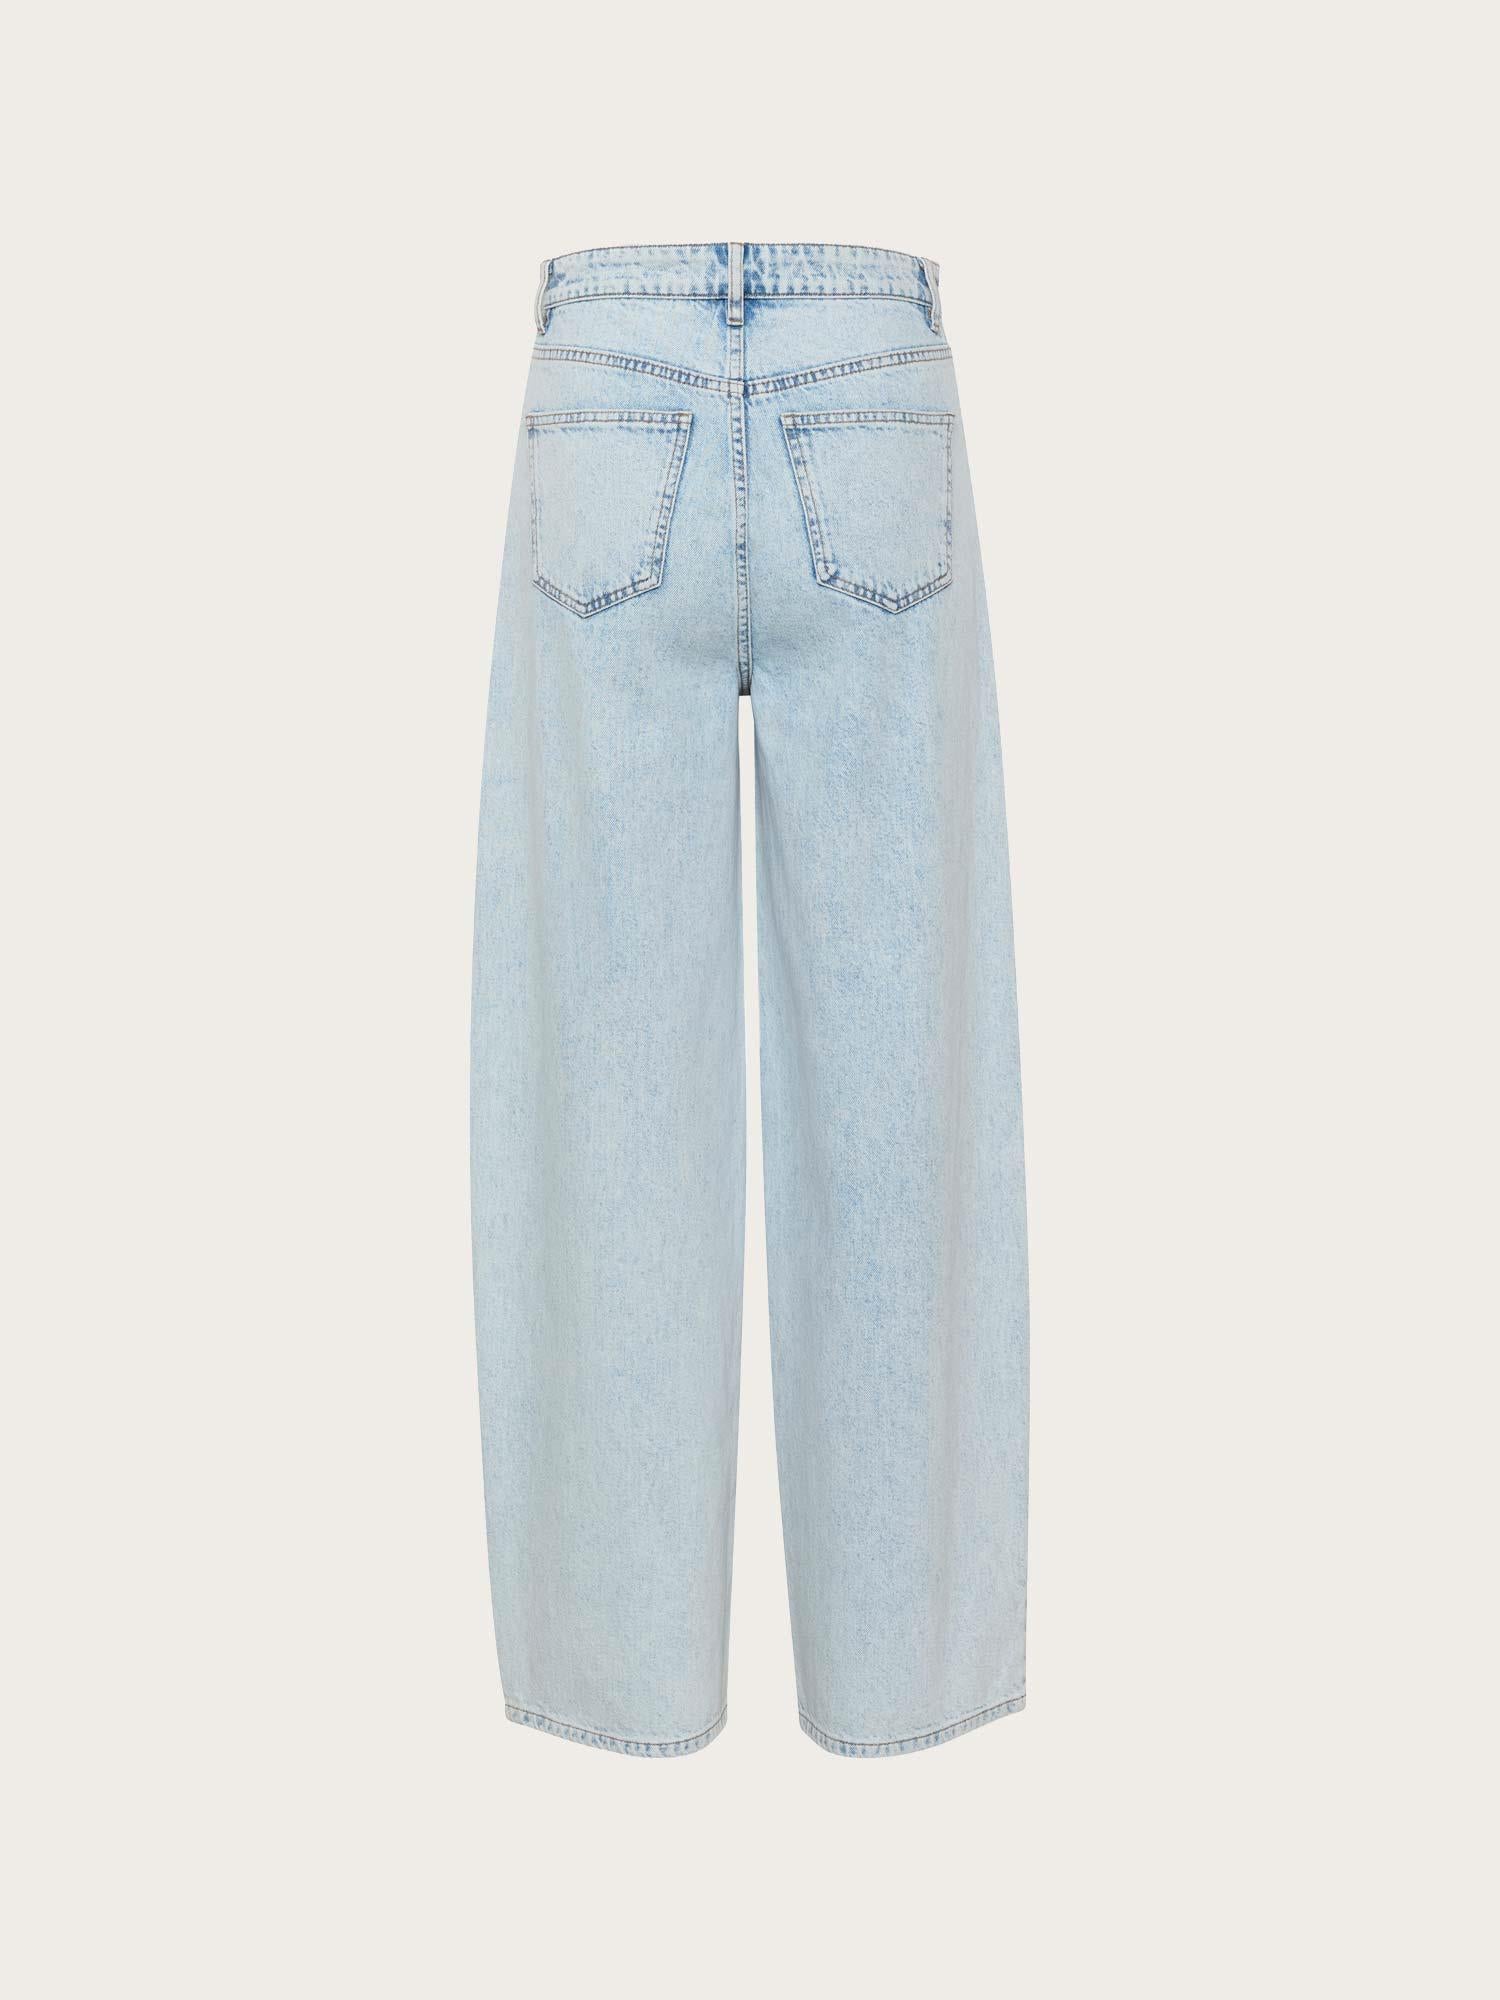 Kaily hw Wide Jeans - Light Blue Washed